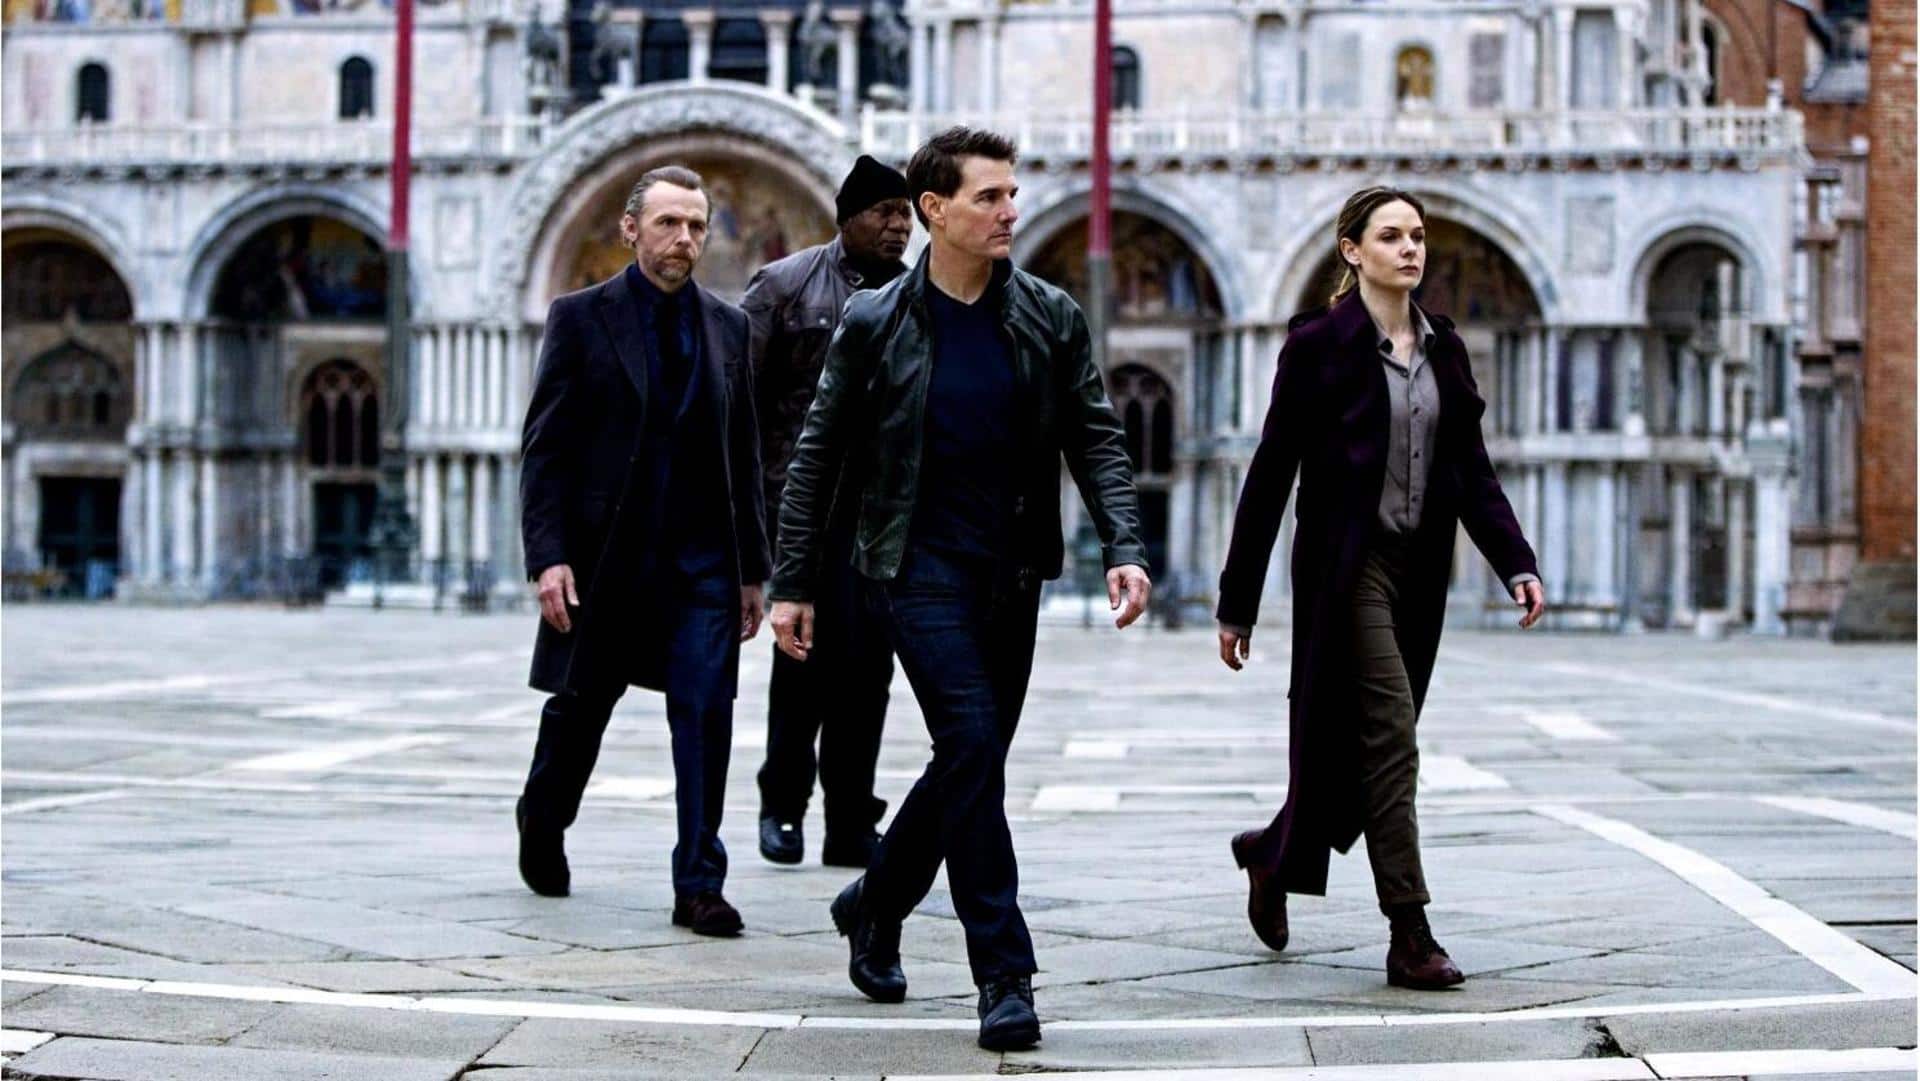 #BoxOfficeCollection: 'Mission: Impossible 7' to breach Rs. 100cr mark soon